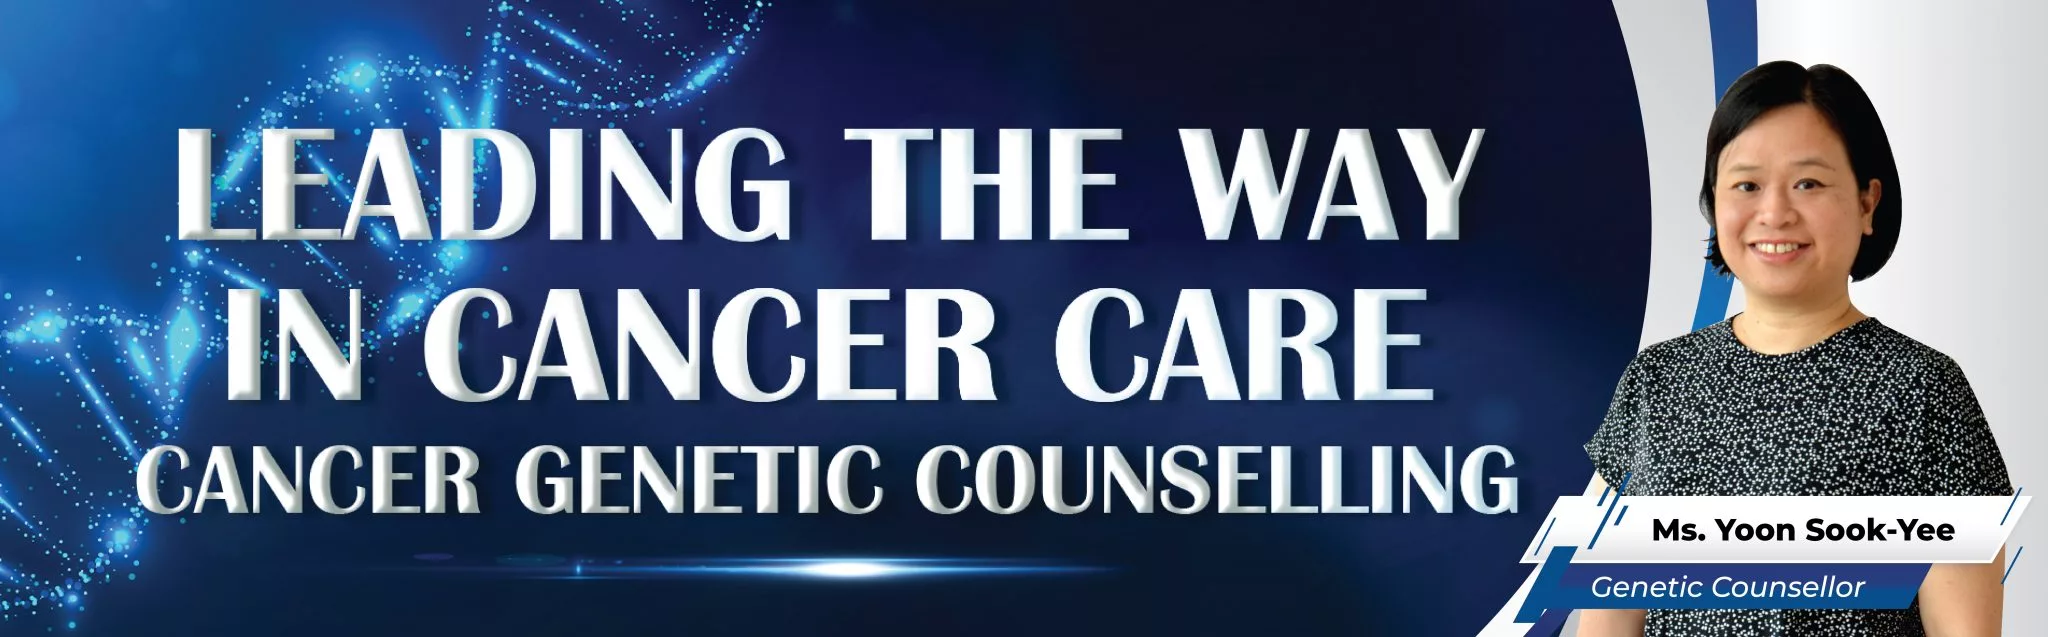 beacon-leading-cancer-genetic-counselling